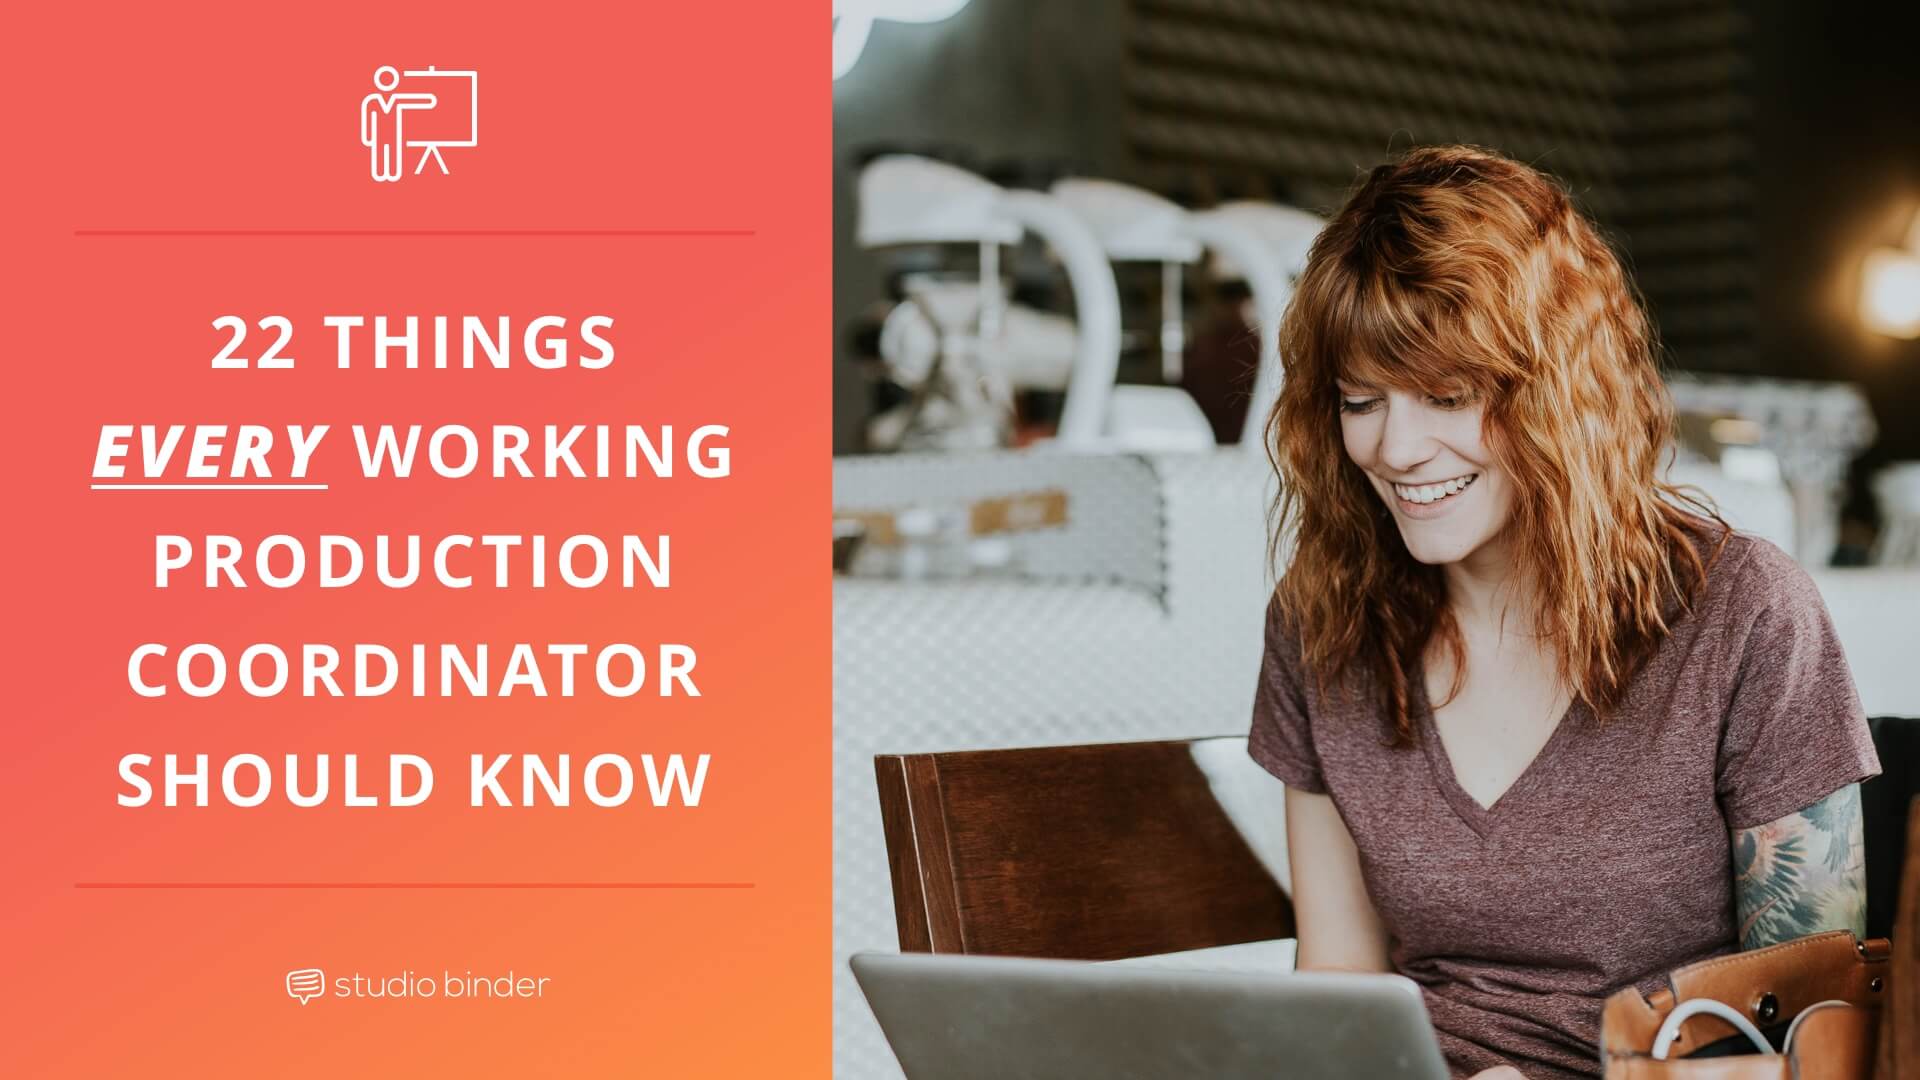 22 Things Every Working Production Coordinator Should Know - Social Image - StudioBinder